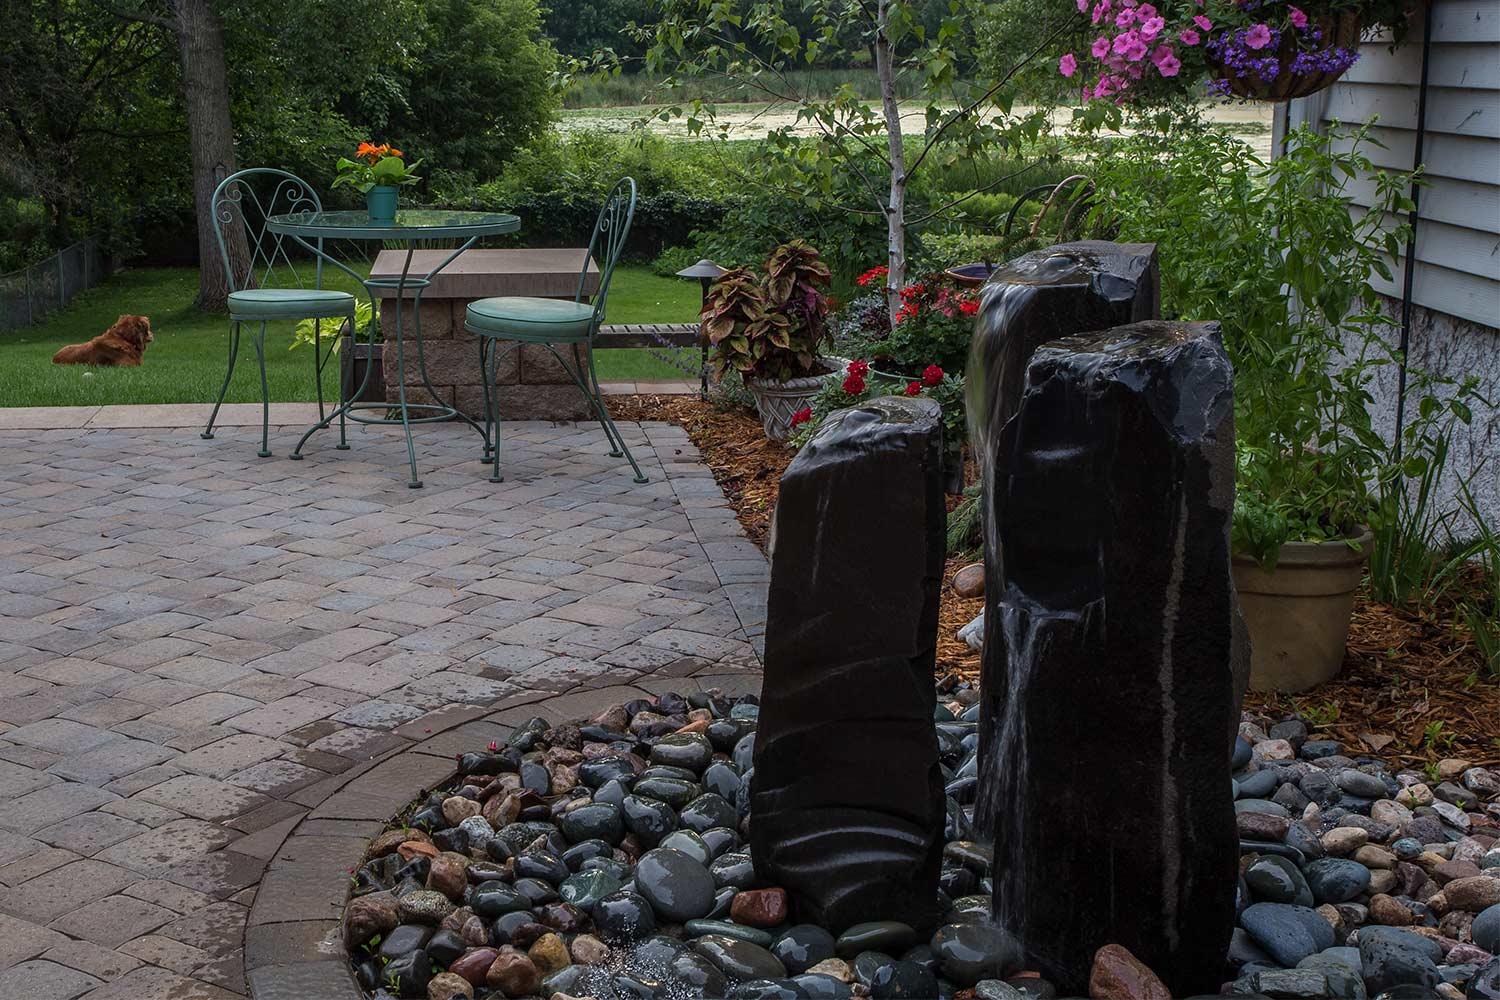 Backyard patio by a grassy lake with the basalt column water fountains.